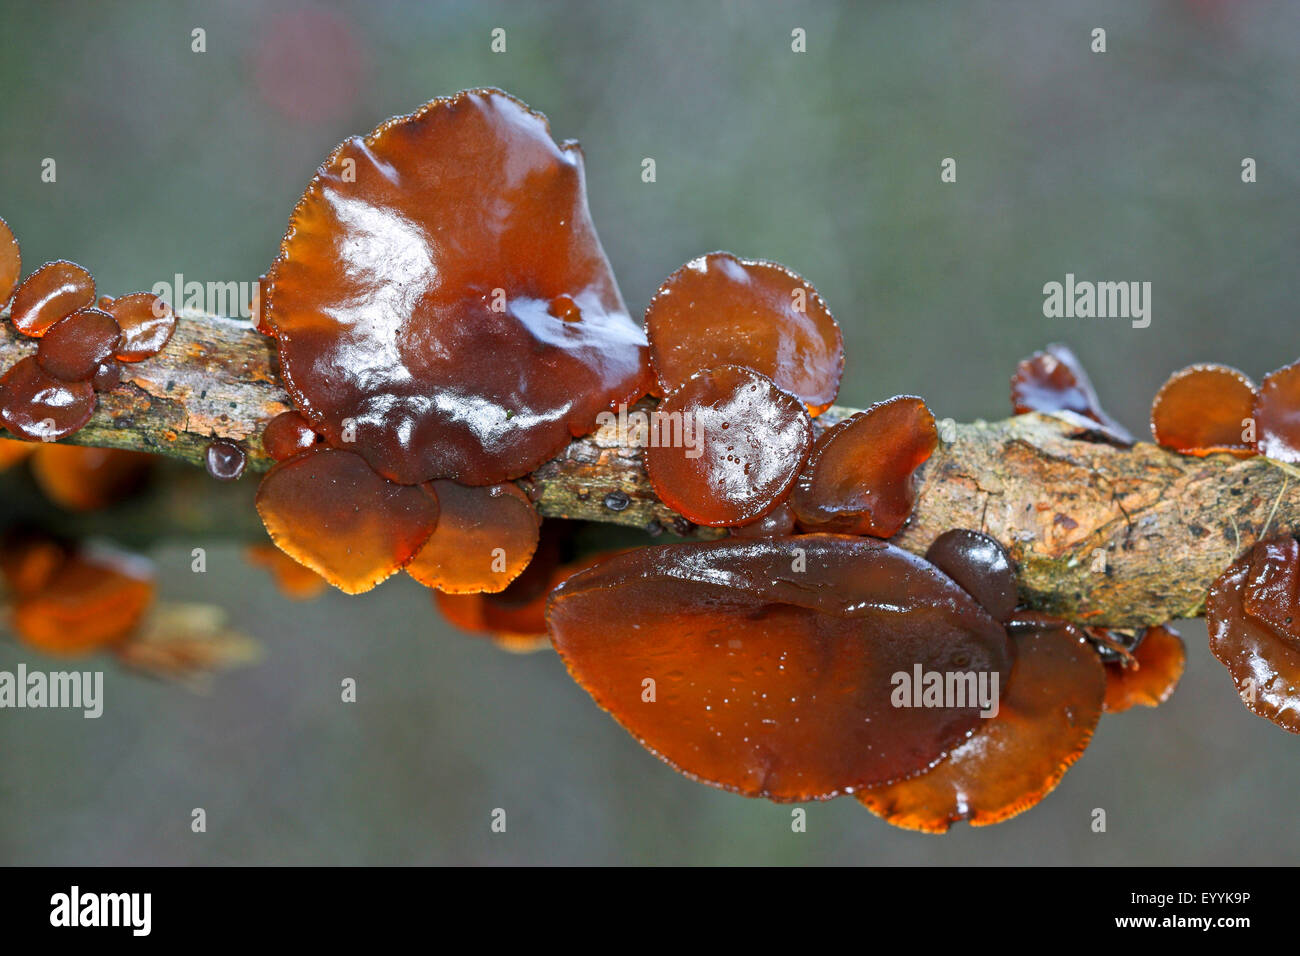 Exidia recisa, willow brain, amber jelly roll, fruiting bodies at a branch, Germany Stock Photo